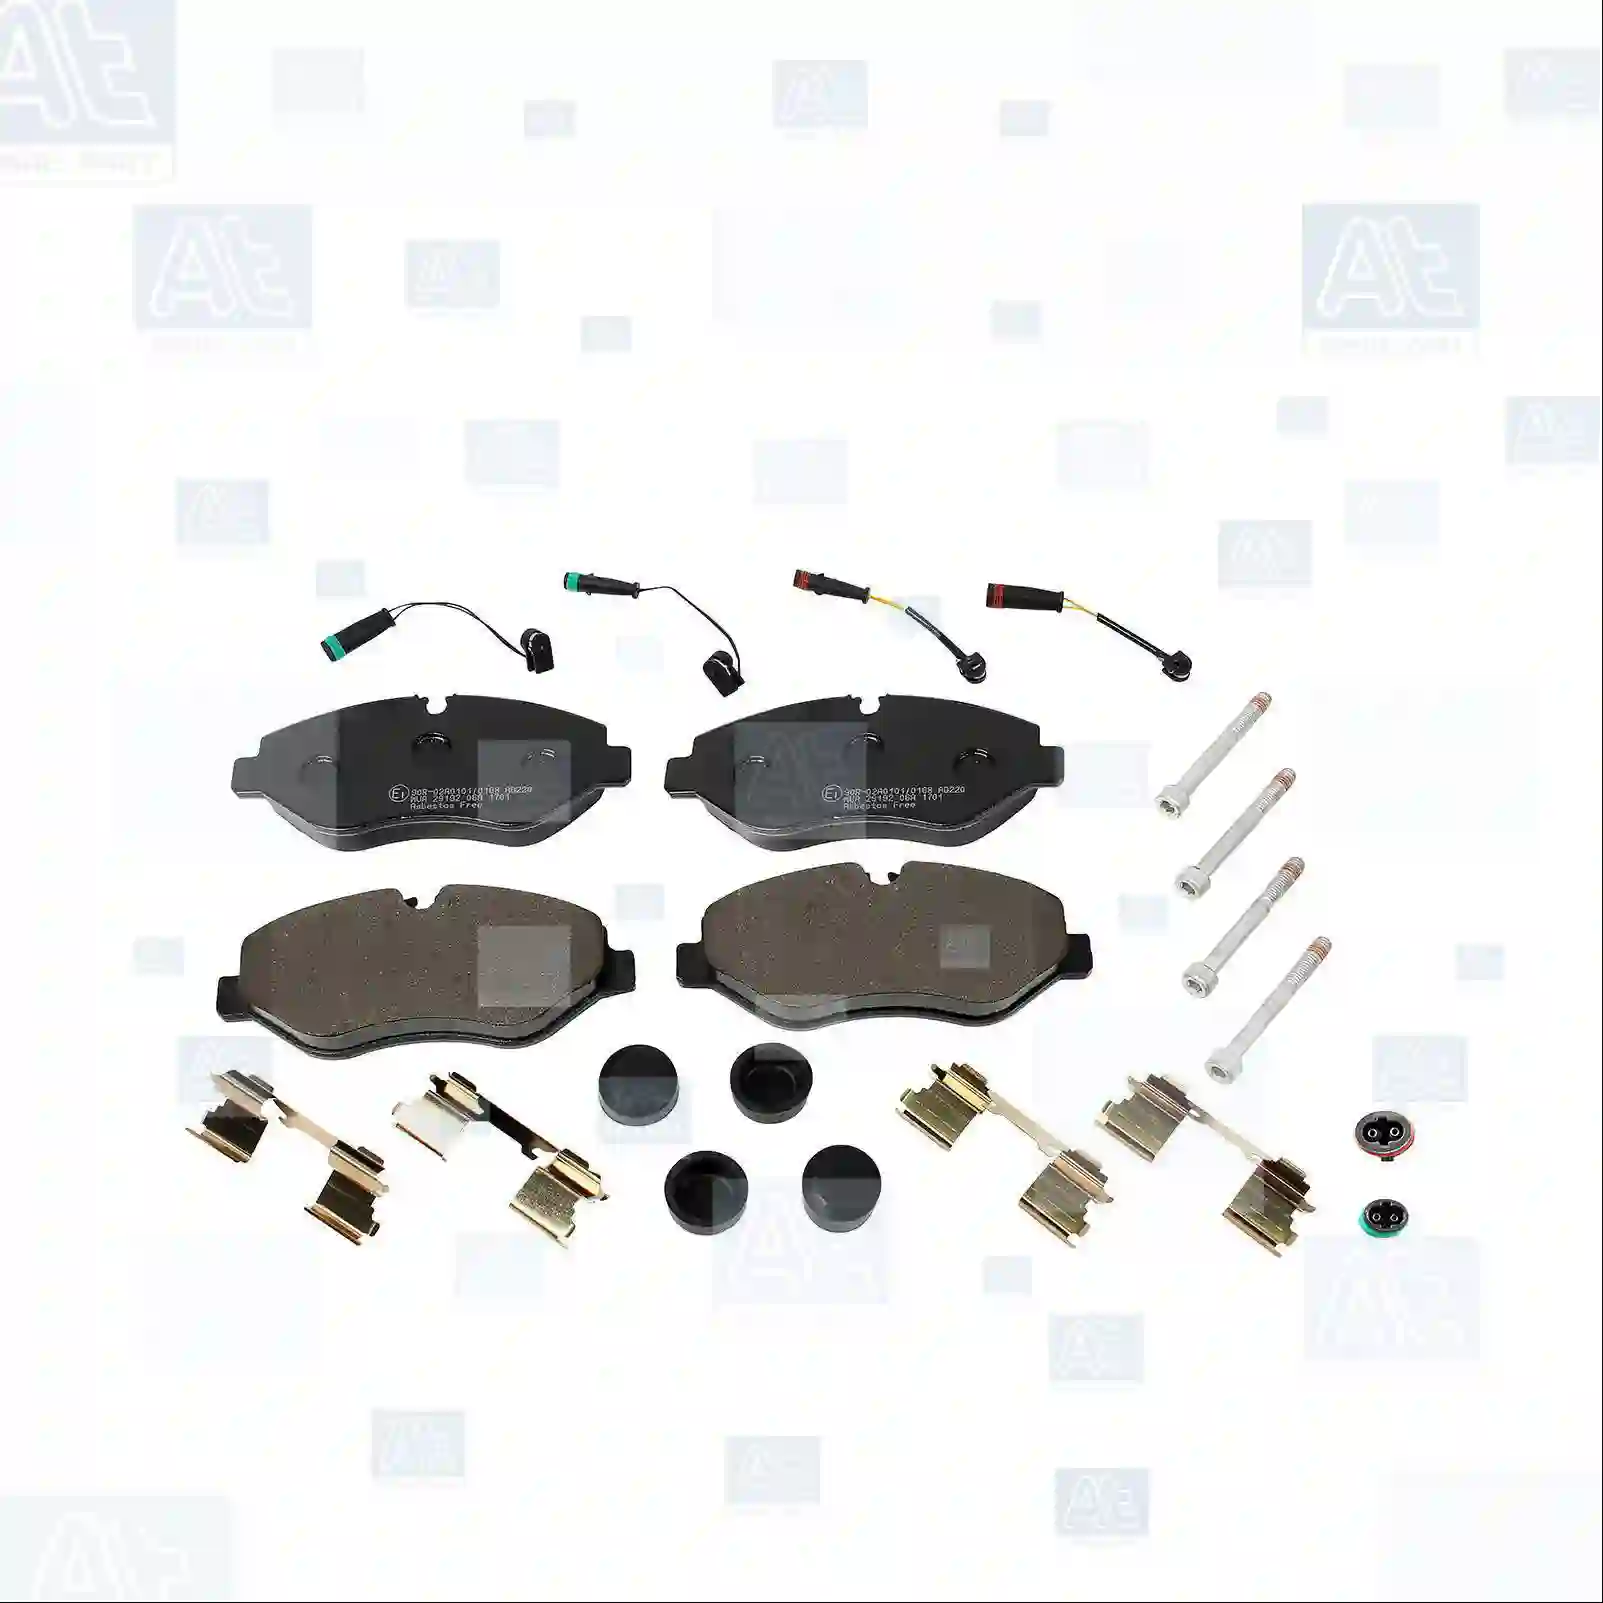 Disc brake pad kit, with accessories, 77715572, 2E0698151, 2E0698151B, 2E0698151E, 2E0698151, 68006732AA, 68006732AB, 68006732AC, 68055461AA, 0004230230, 0004230430, 0004320430, 0034205120, 0034206220, 0034209420, 0044204420, 0044204720, 0044204920, 0044205220, 0044206720, 0044207820, 0044208320, 0054202120, 0054204120, 0054205220, 0054206120, 0054206720, 0054207020, 0054207920, 0054209320, 0054209420, 0064200120, 0064208420, 0074201020, 0084205020, 1644201520, 1644201920, 9064210010, 9064210400, 5001868606, 2E0698151, 2E0698151B, 2E0698151E, 2E0698151, 2E0698151B, 2E0698151E, 2E0698151, 2E0698151B, 2E0698151E, JZW698151AB ||  77715572 At Spare Part | Engine, Accelerator Pedal, Camshaft, Connecting Rod, Crankcase, Crankshaft, Cylinder Head, Engine Suspension Mountings, Exhaust Manifold, Exhaust Gas Recirculation, Filter Kits, Flywheel Housing, General Overhaul Kits, Engine, Intake Manifold, Oil Cleaner, Oil Cooler, Oil Filter, Oil Pump, Oil Sump, Piston & Liner, Sensor & Switch, Timing Case, Turbocharger, Cooling System, Belt Tensioner, Coolant Filter, Coolant Pipe, Corrosion Prevention Agent, Drive, Expansion Tank, Fan, Intercooler, Monitors & Gauges, Radiator, Thermostat, V-Belt / Timing belt, Water Pump, Fuel System, Electronical Injector Unit, Feed Pump, Fuel Filter, cpl., Fuel Gauge Sender,  Fuel Line, Fuel Pump, Fuel Tank, Injection Line Kit, Injection Pump, Exhaust System, Clutch & Pedal, Gearbox, Propeller Shaft, Axles, Brake System, Hubs & Wheels, Suspension, Leaf Spring, Universal Parts / Accessories, Steering, Electrical System, Cabin Disc brake pad kit, with accessories, 77715572, 2E0698151, 2E0698151B, 2E0698151E, 2E0698151, 68006732AA, 68006732AB, 68006732AC, 68055461AA, 0004230230, 0004230430, 0004320430, 0034205120, 0034206220, 0034209420, 0044204420, 0044204720, 0044204920, 0044205220, 0044206720, 0044207820, 0044208320, 0054202120, 0054204120, 0054205220, 0054206120, 0054206720, 0054207020, 0054207920, 0054209320, 0054209420, 0064200120, 0064208420, 0074201020, 0084205020, 1644201520, 1644201920, 9064210010, 9064210400, 5001868606, 2E0698151, 2E0698151B, 2E0698151E, 2E0698151, 2E0698151B, 2E0698151E, 2E0698151, 2E0698151B, 2E0698151E, JZW698151AB ||  77715572 At Spare Part | Engine, Accelerator Pedal, Camshaft, Connecting Rod, Crankcase, Crankshaft, Cylinder Head, Engine Suspension Mountings, Exhaust Manifold, Exhaust Gas Recirculation, Filter Kits, Flywheel Housing, General Overhaul Kits, Engine, Intake Manifold, Oil Cleaner, Oil Cooler, Oil Filter, Oil Pump, Oil Sump, Piston & Liner, Sensor & Switch, Timing Case, Turbocharger, Cooling System, Belt Tensioner, Coolant Filter, Coolant Pipe, Corrosion Prevention Agent, Drive, Expansion Tank, Fan, Intercooler, Monitors & Gauges, Radiator, Thermostat, V-Belt / Timing belt, Water Pump, Fuel System, Electronical Injector Unit, Feed Pump, Fuel Filter, cpl., Fuel Gauge Sender,  Fuel Line, Fuel Pump, Fuel Tank, Injection Line Kit, Injection Pump, Exhaust System, Clutch & Pedal, Gearbox, Propeller Shaft, Axles, Brake System, Hubs & Wheels, Suspension, Leaf Spring, Universal Parts / Accessories, Steering, Electrical System, Cabin